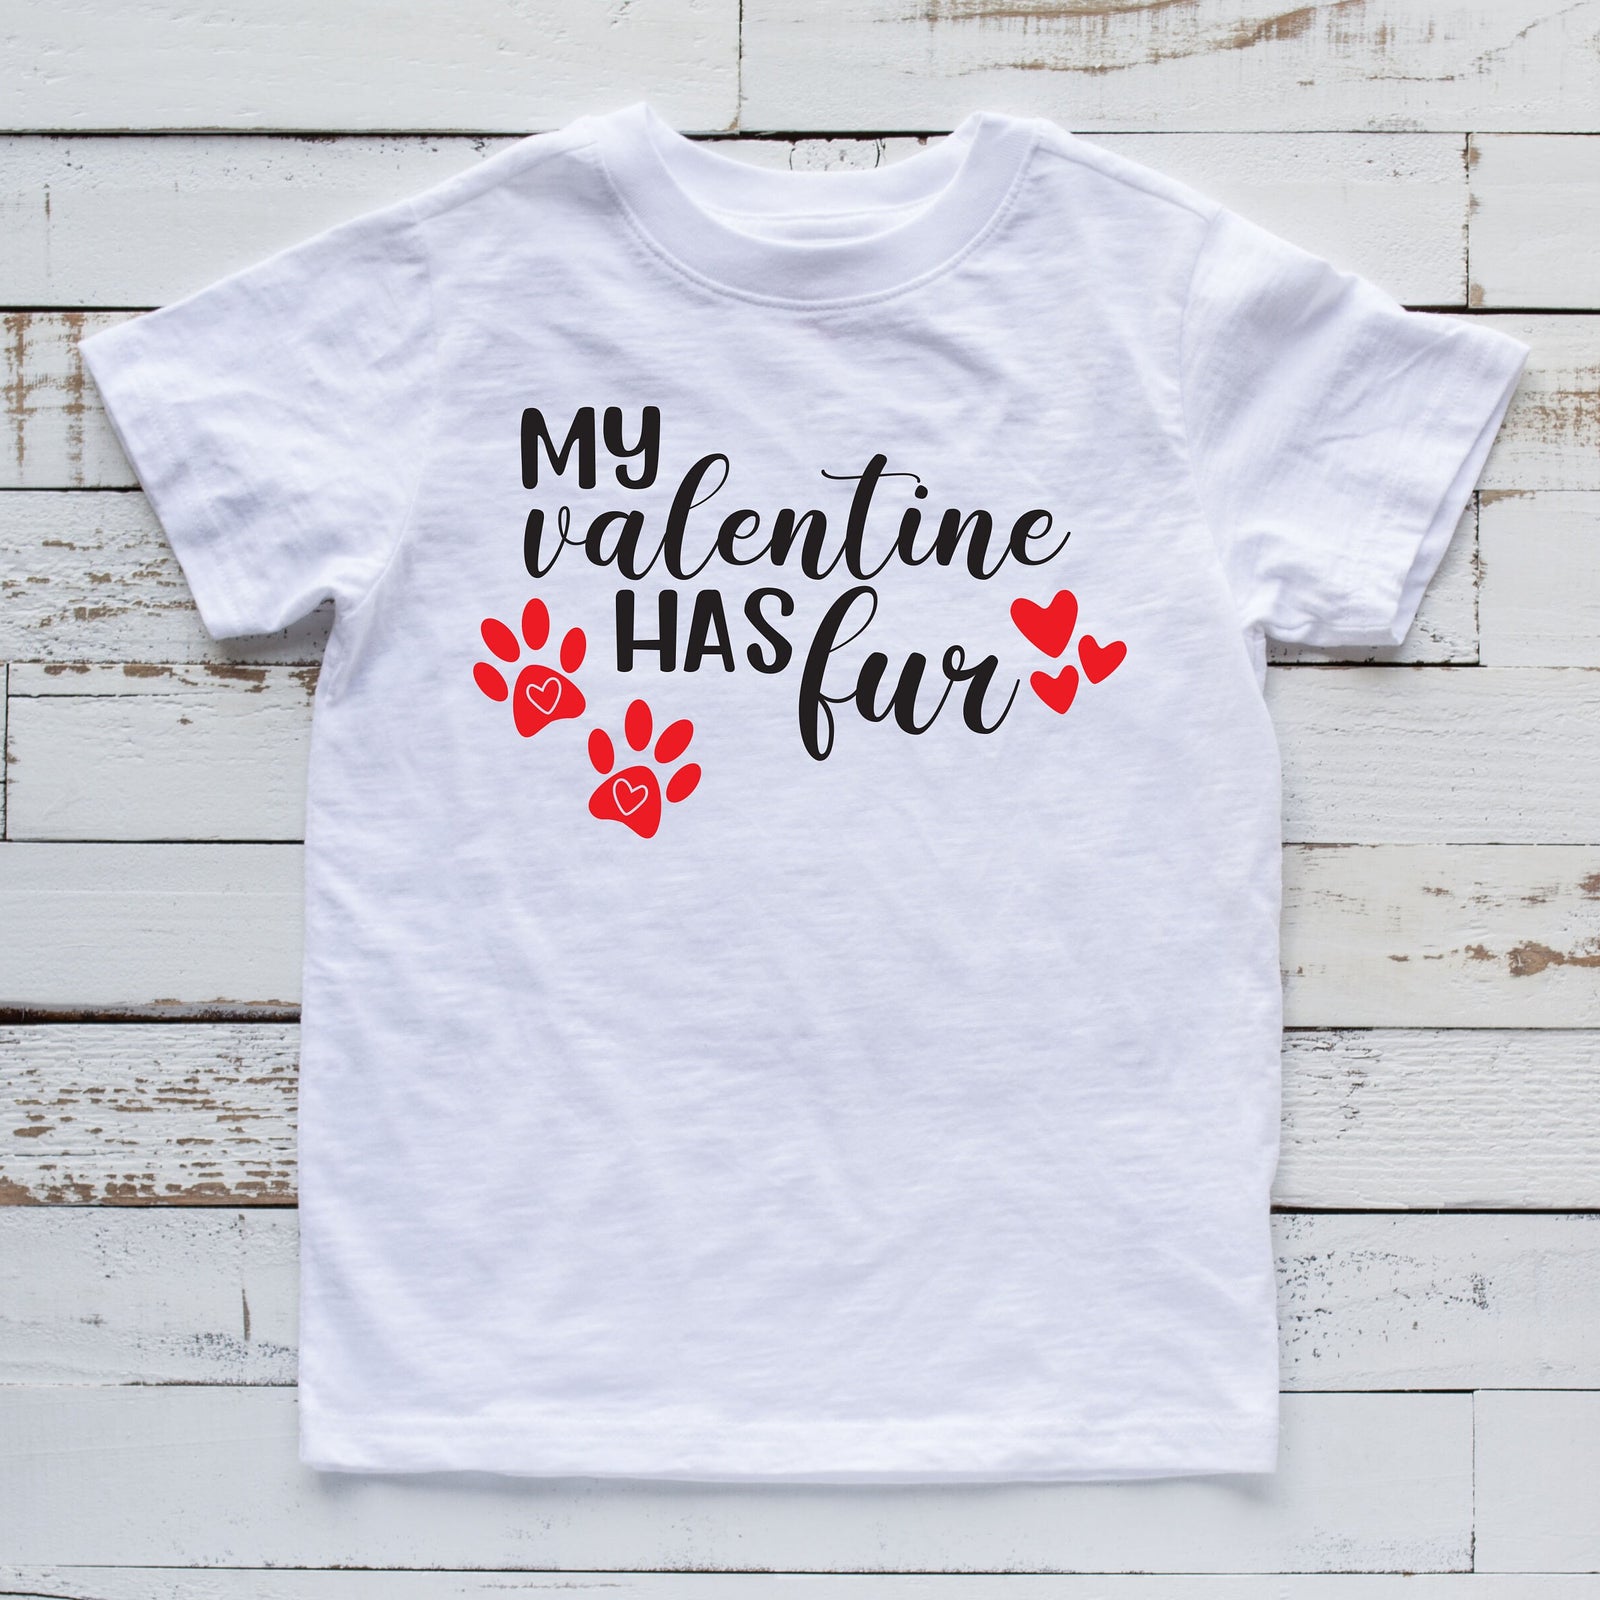 My Valentine Has Fur Love T Shirt - Valentine Shirt for Infants Toddlers Youth Kids - Love T Shirt - Dog Pet Lover